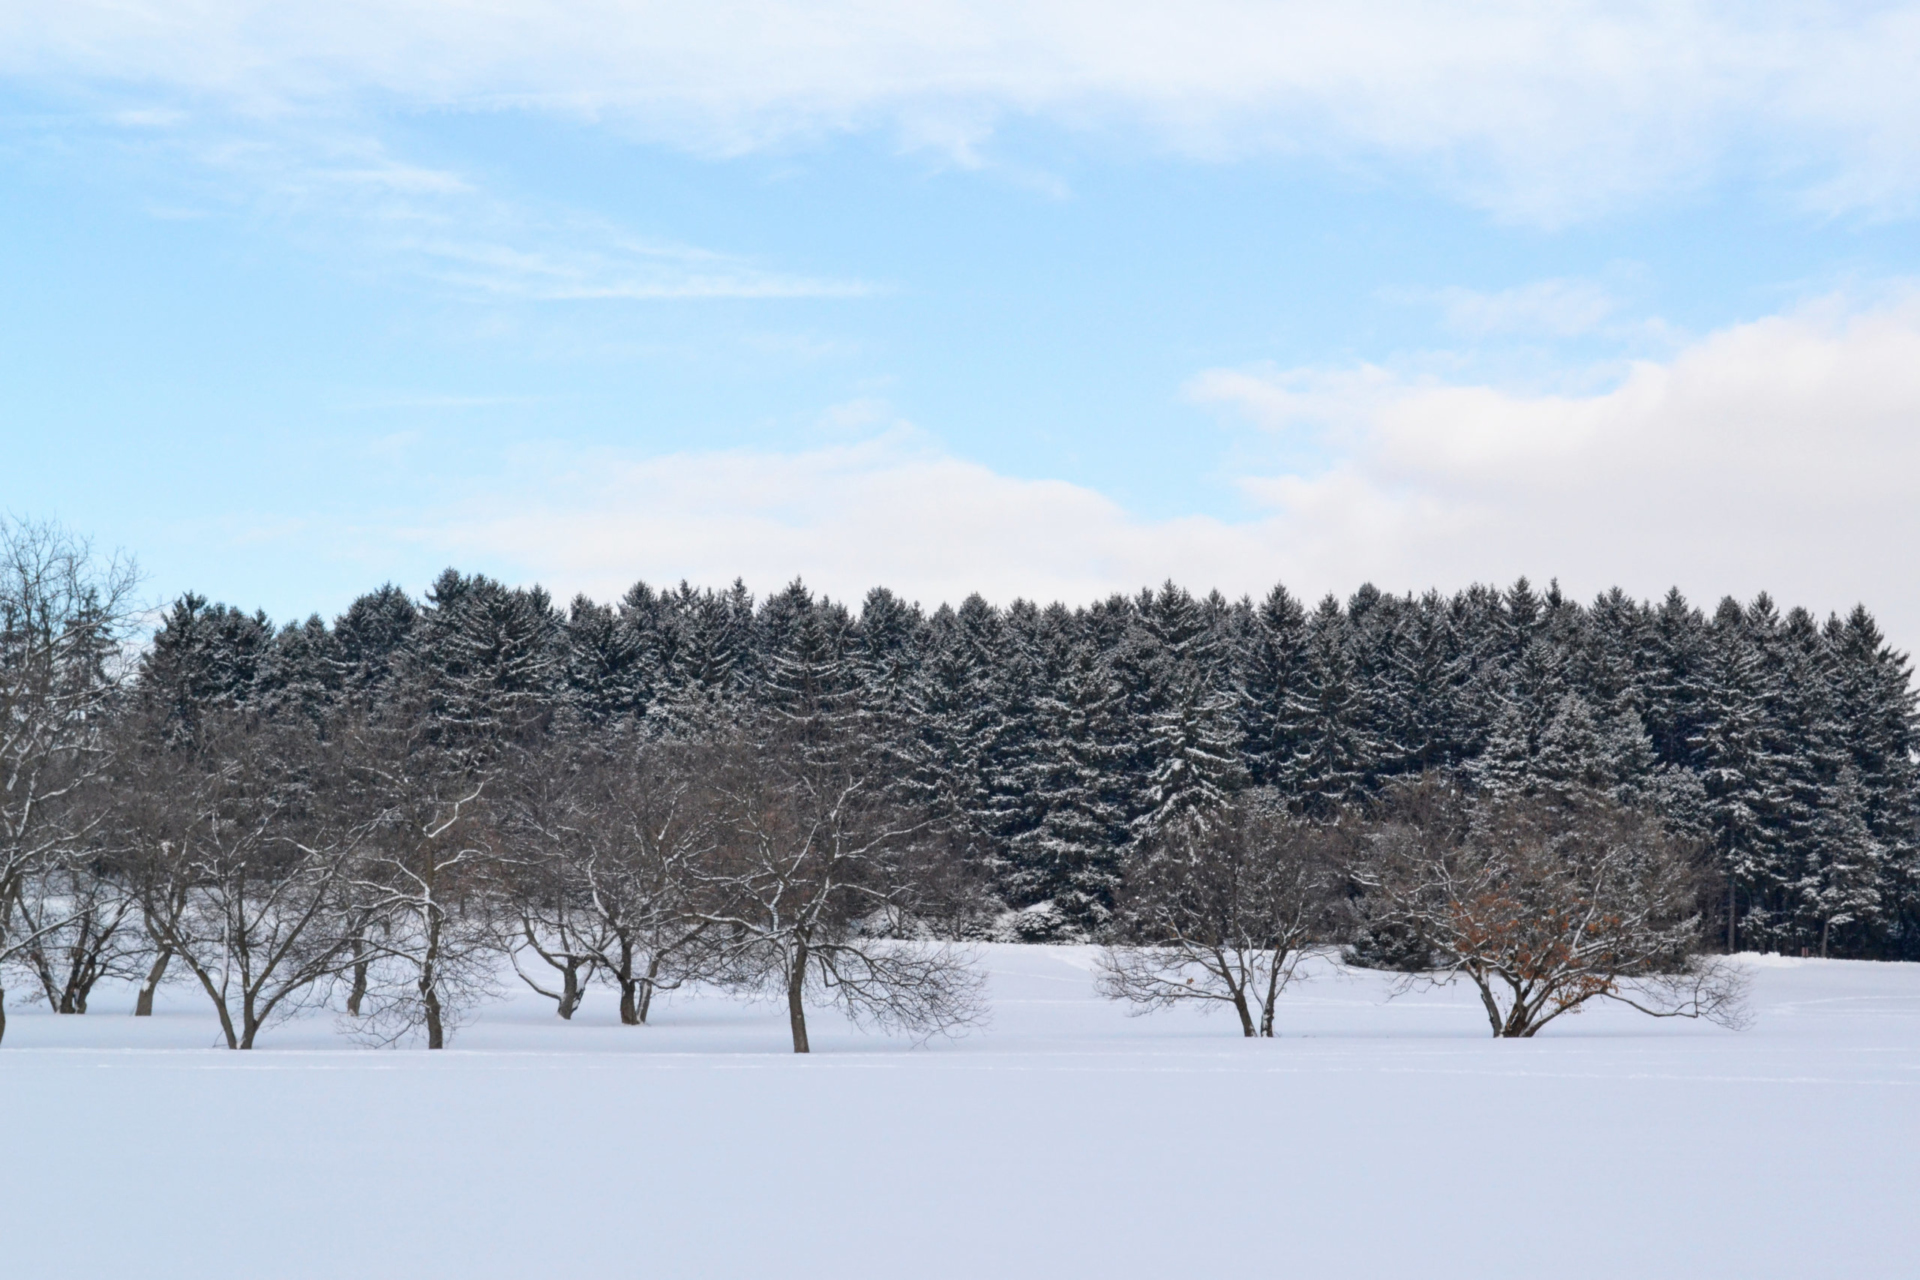 Snowy winter landscape with deciduous and conifer trees.